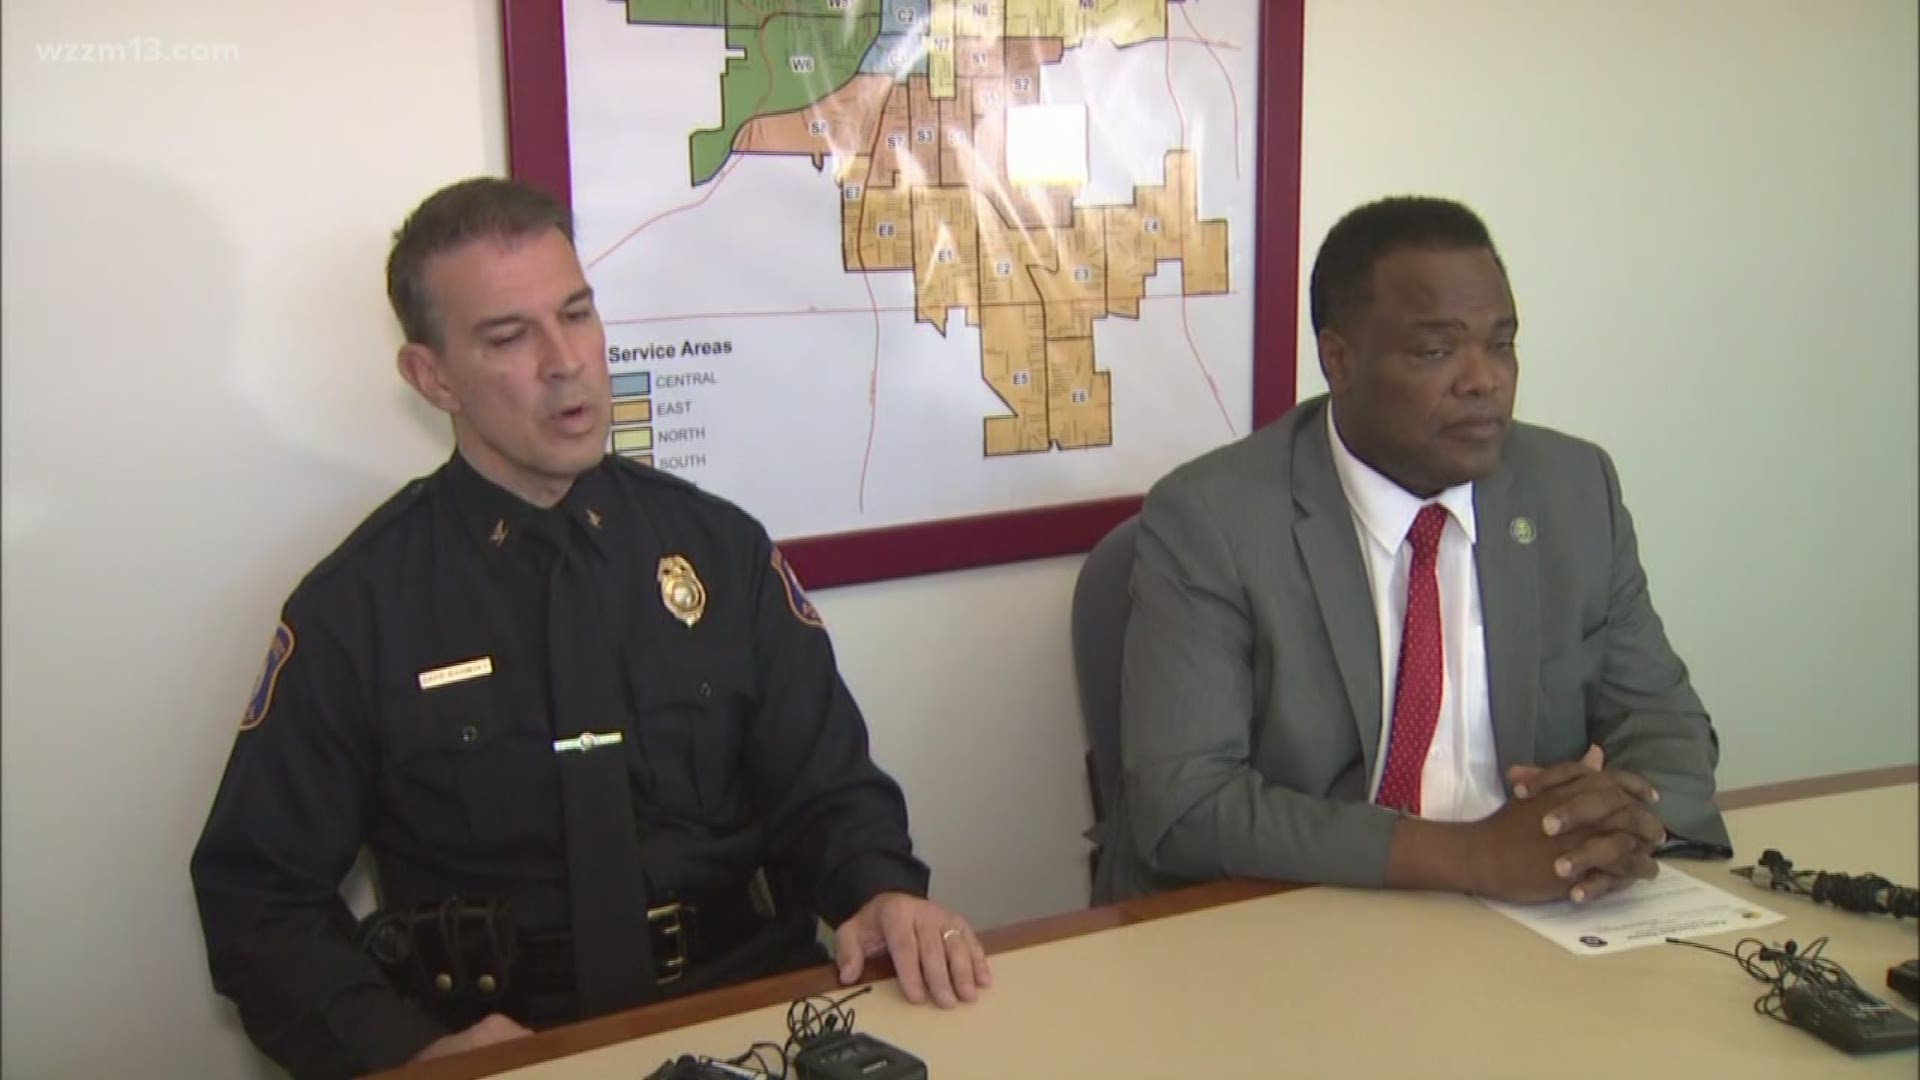 GRPD holds press conference about community relations